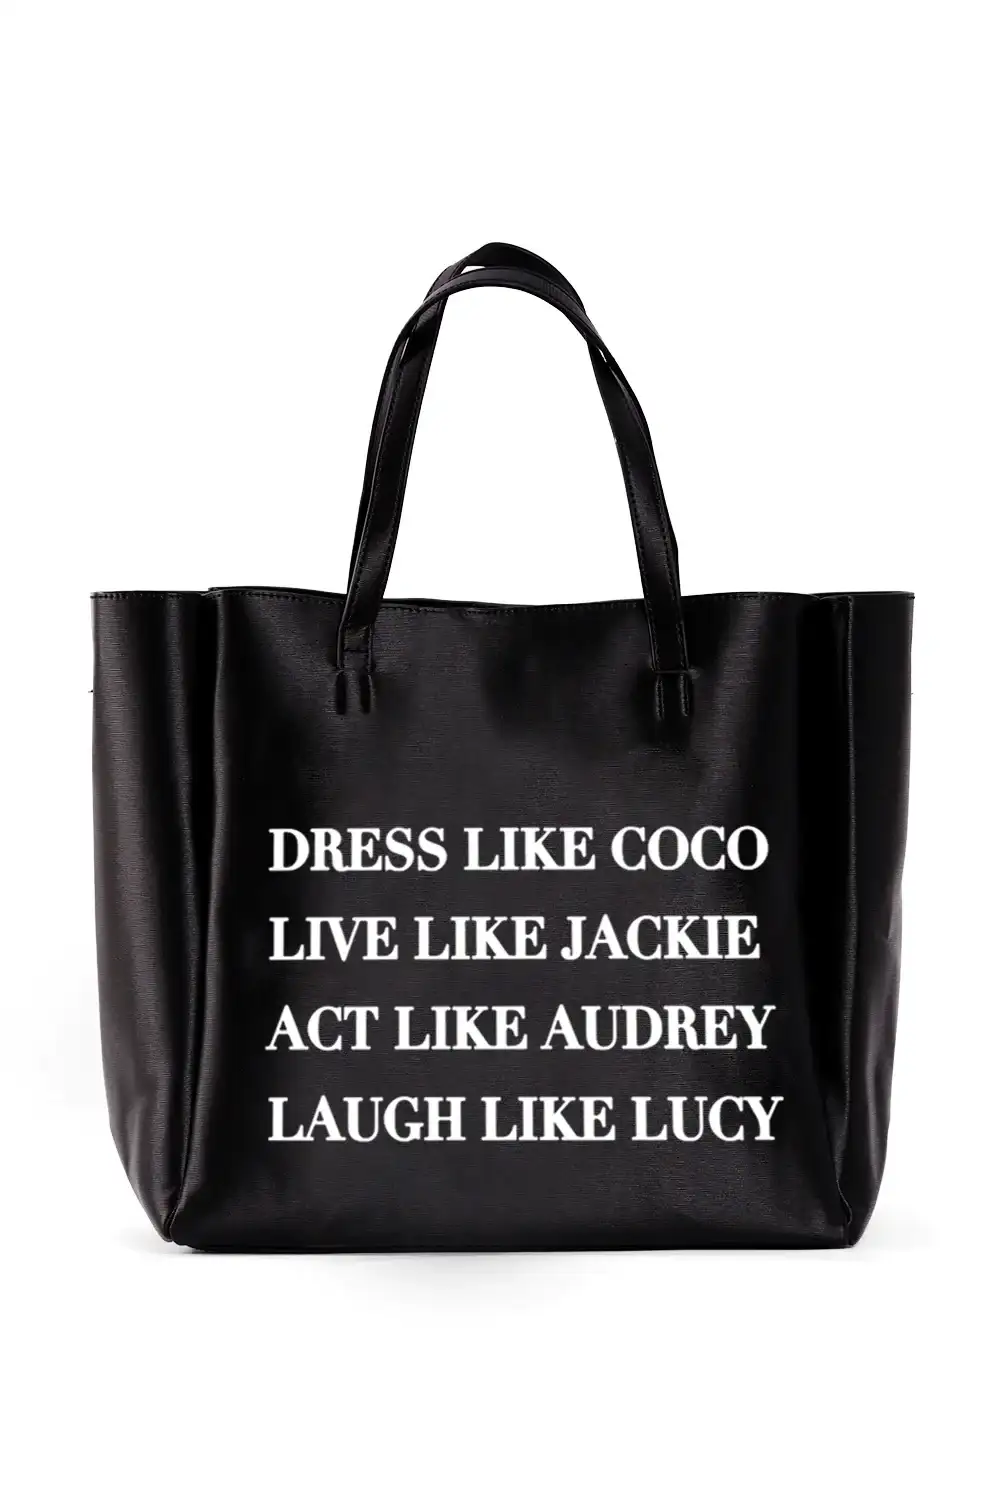 Image of NEVER ENDING TOTE - Dress Like Coco